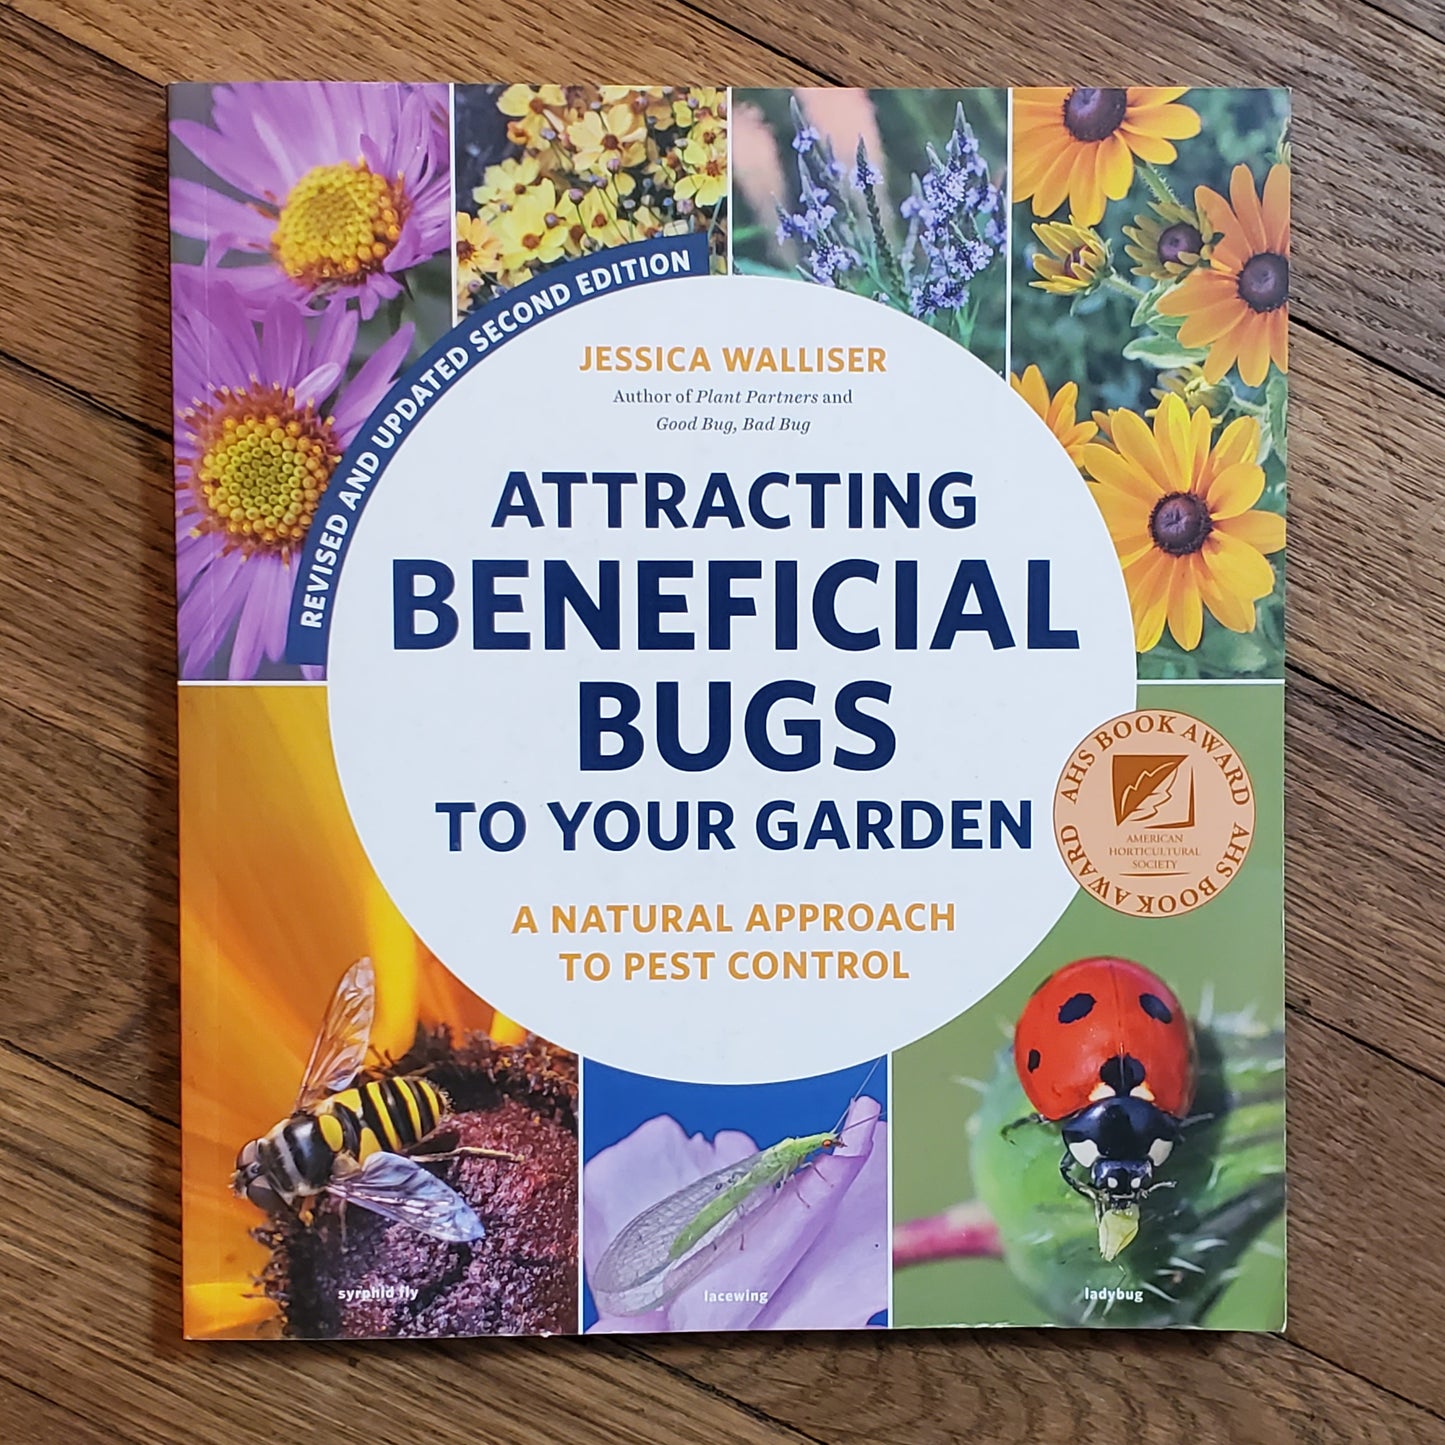 GB Attracting Beneficial Bugs to Your Garden: A Natural Approach to Pest Control